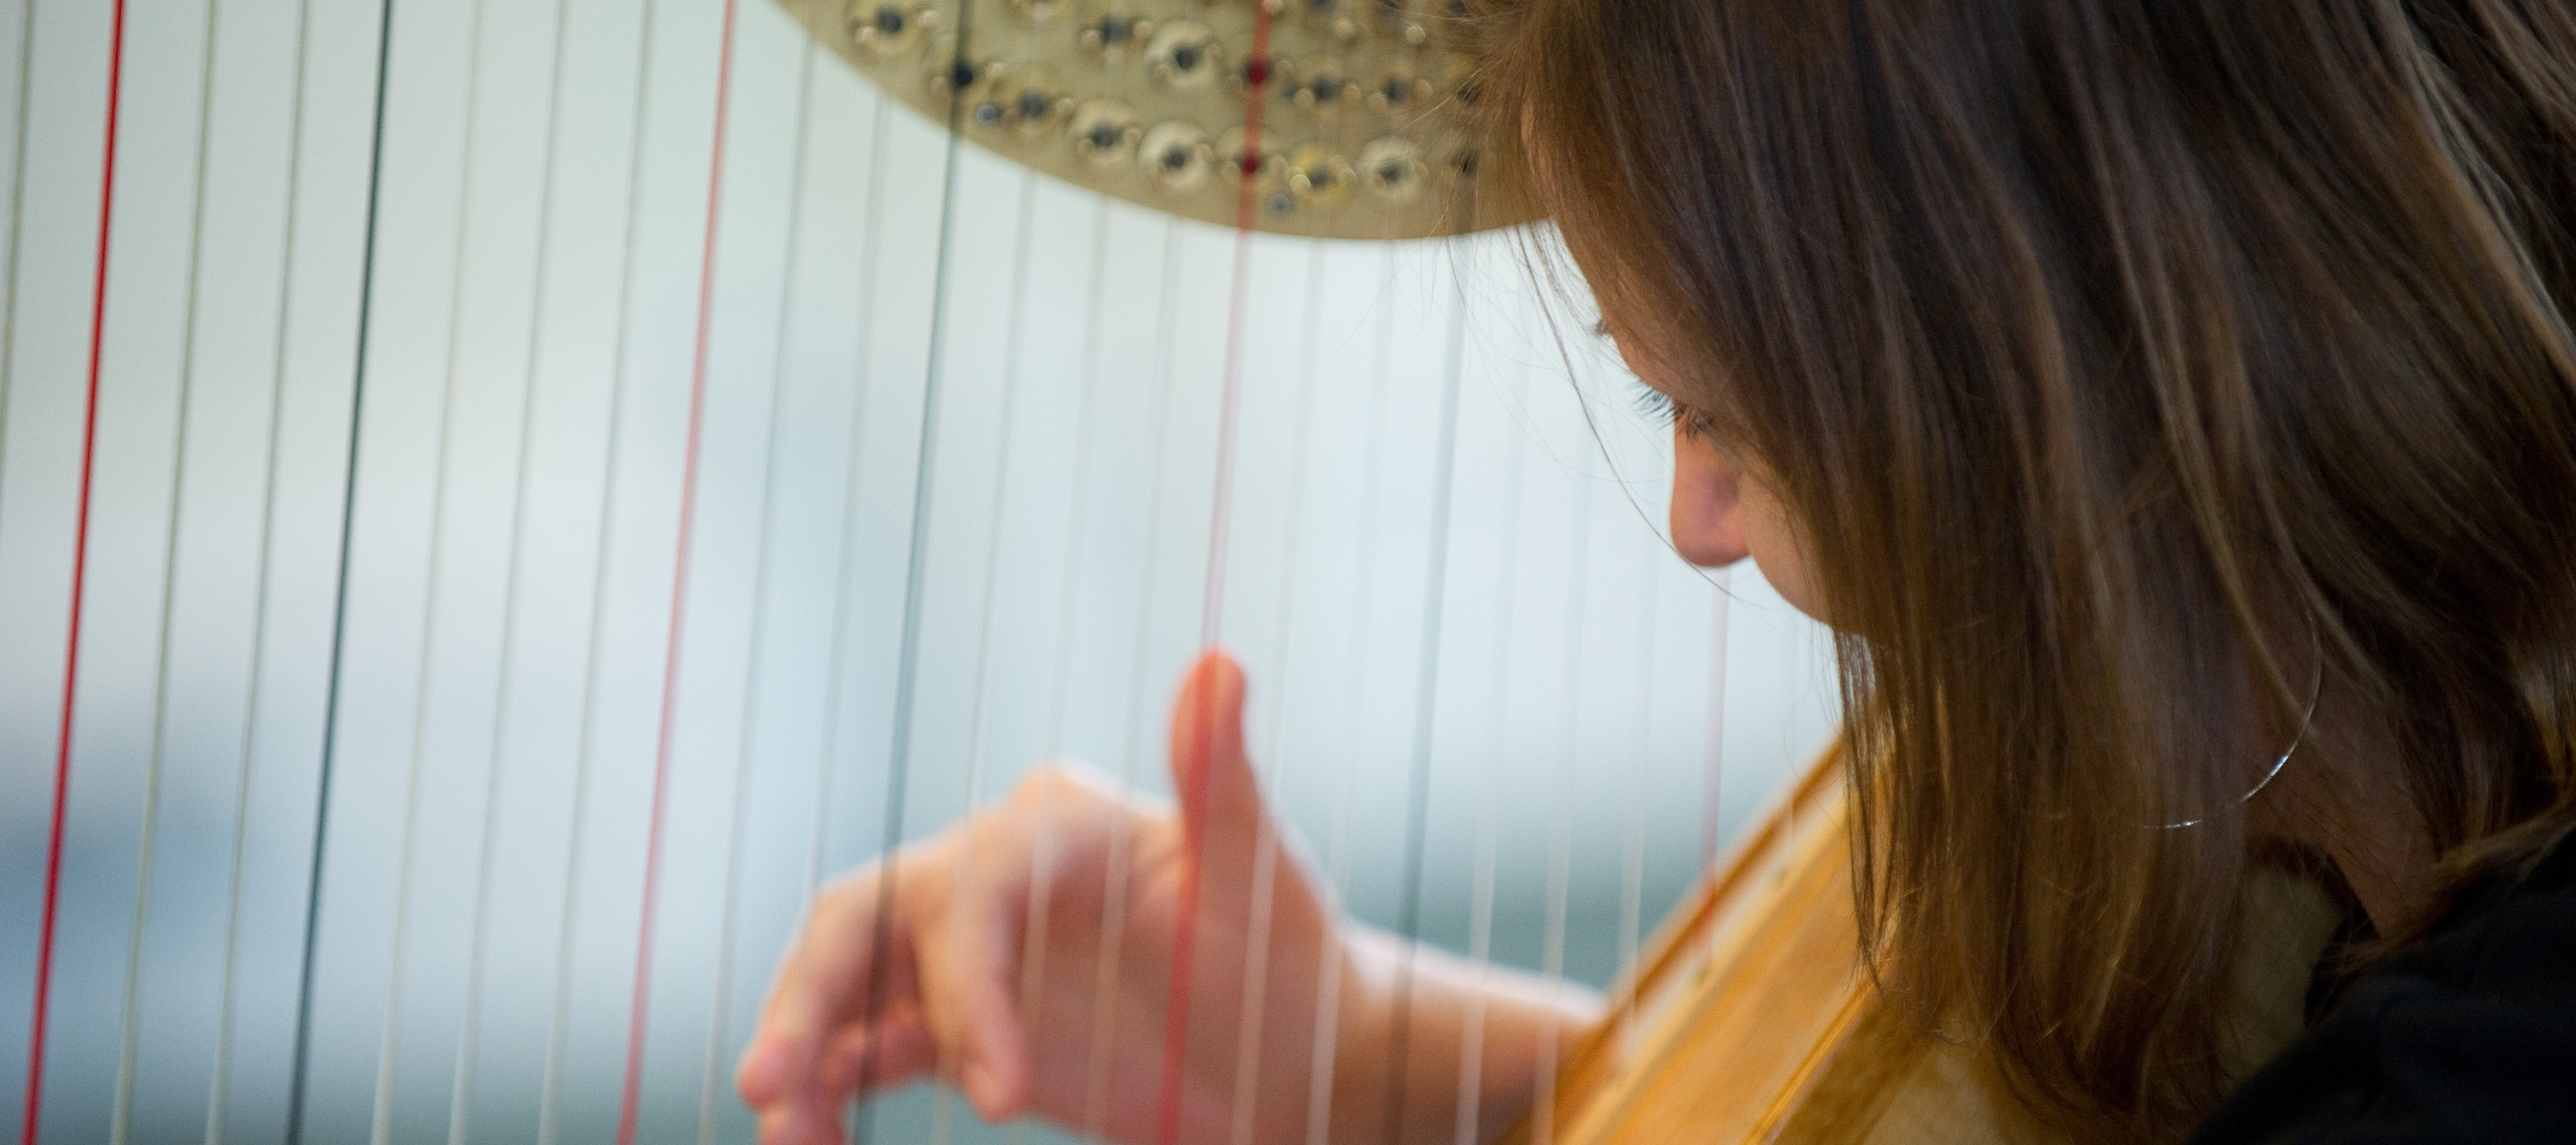 A student plays the orchestral harp